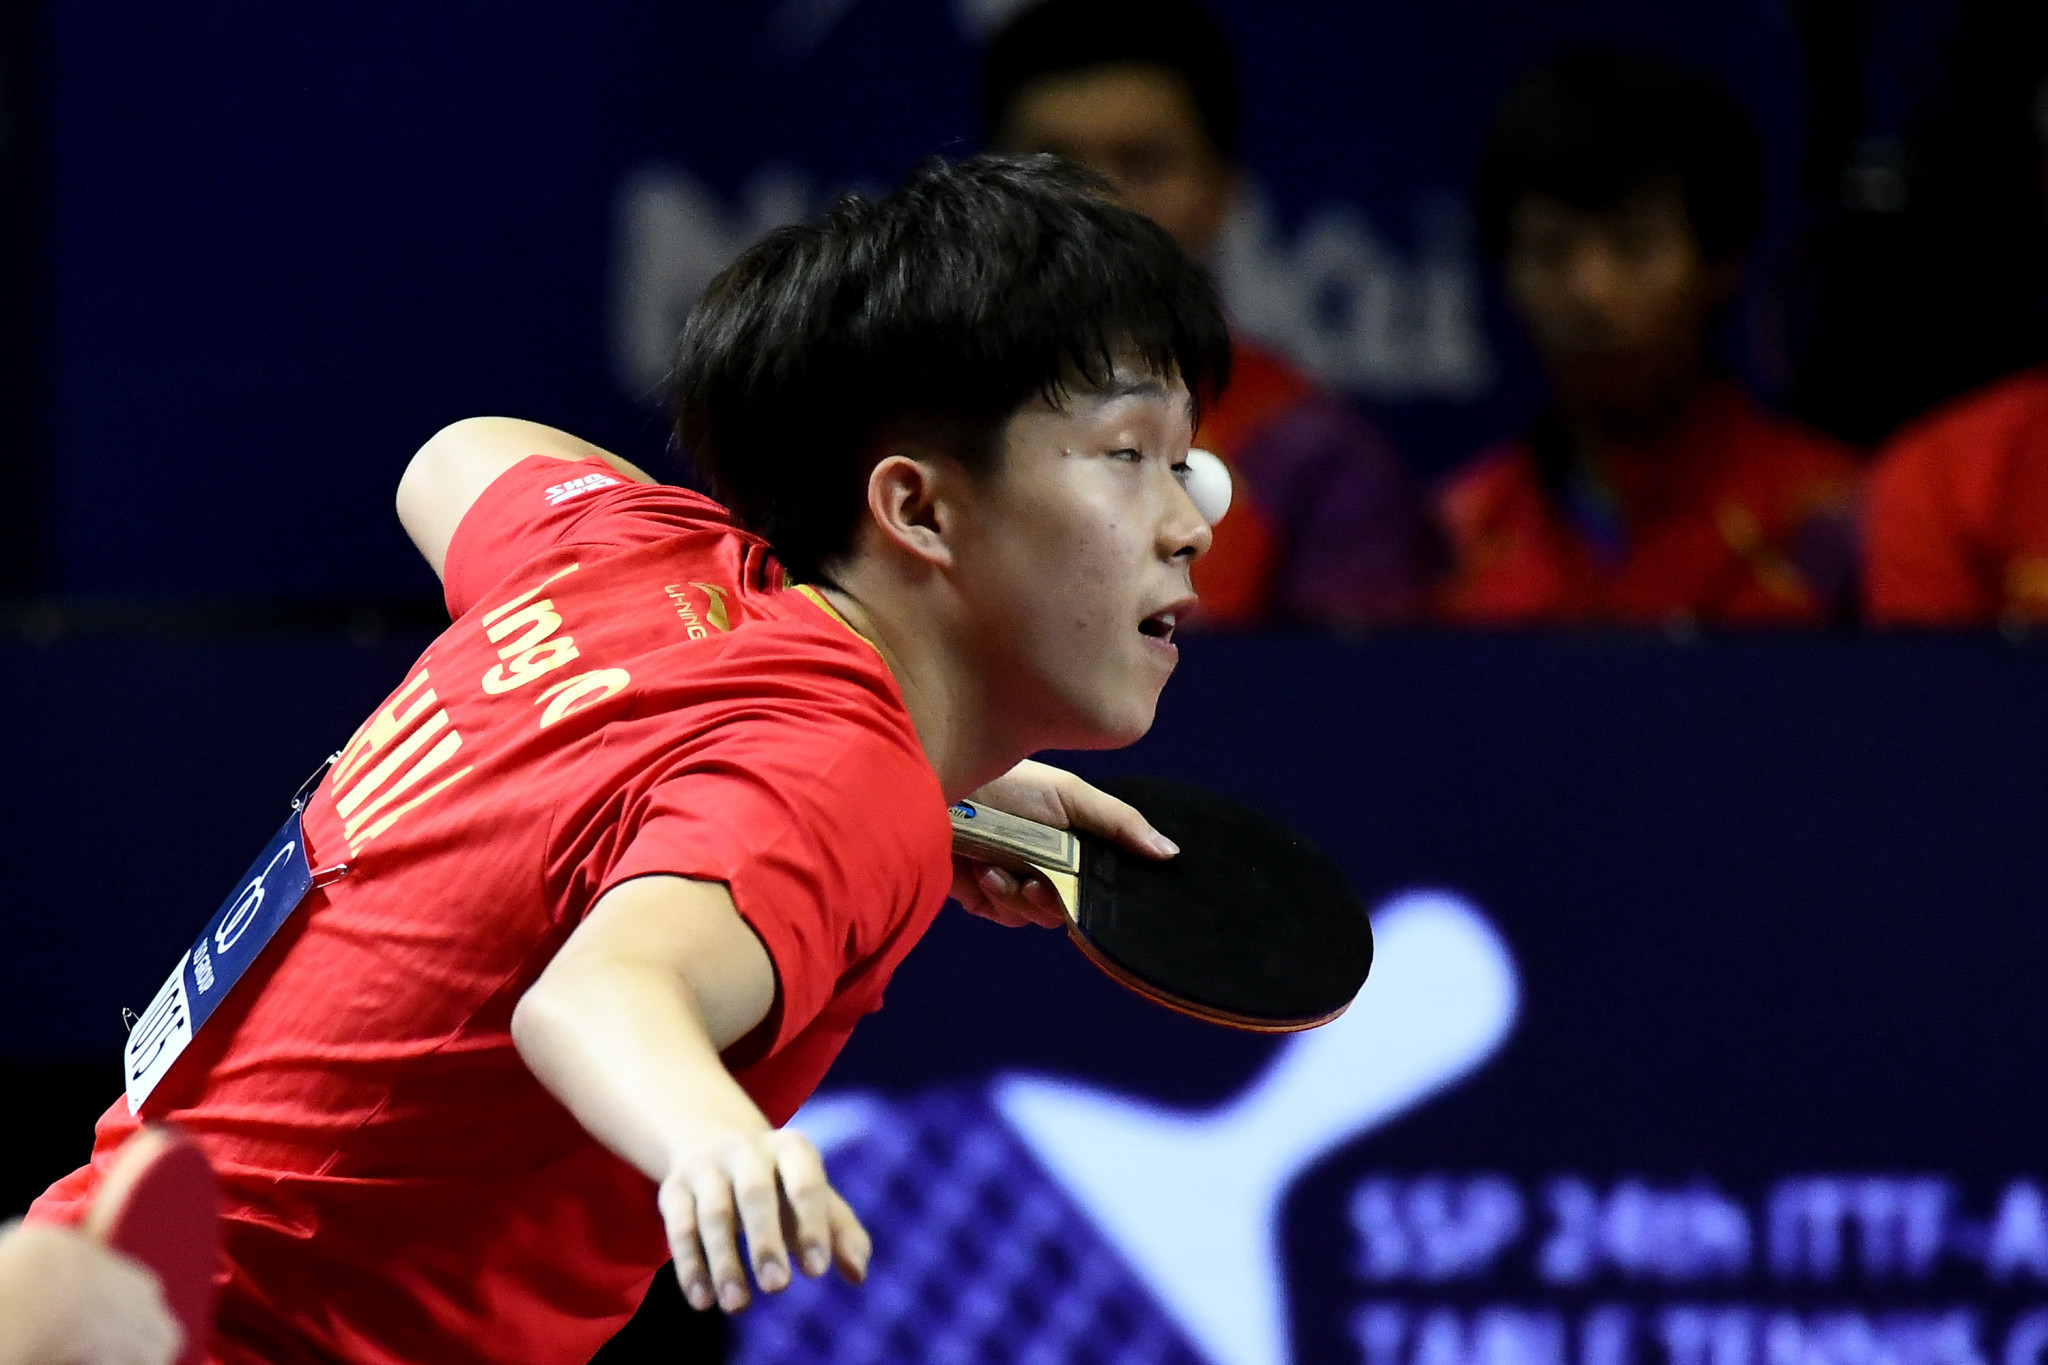 Wang Chuqin sealed his first ITTF World Tour title with victory in the men's singles event ©Getty Images